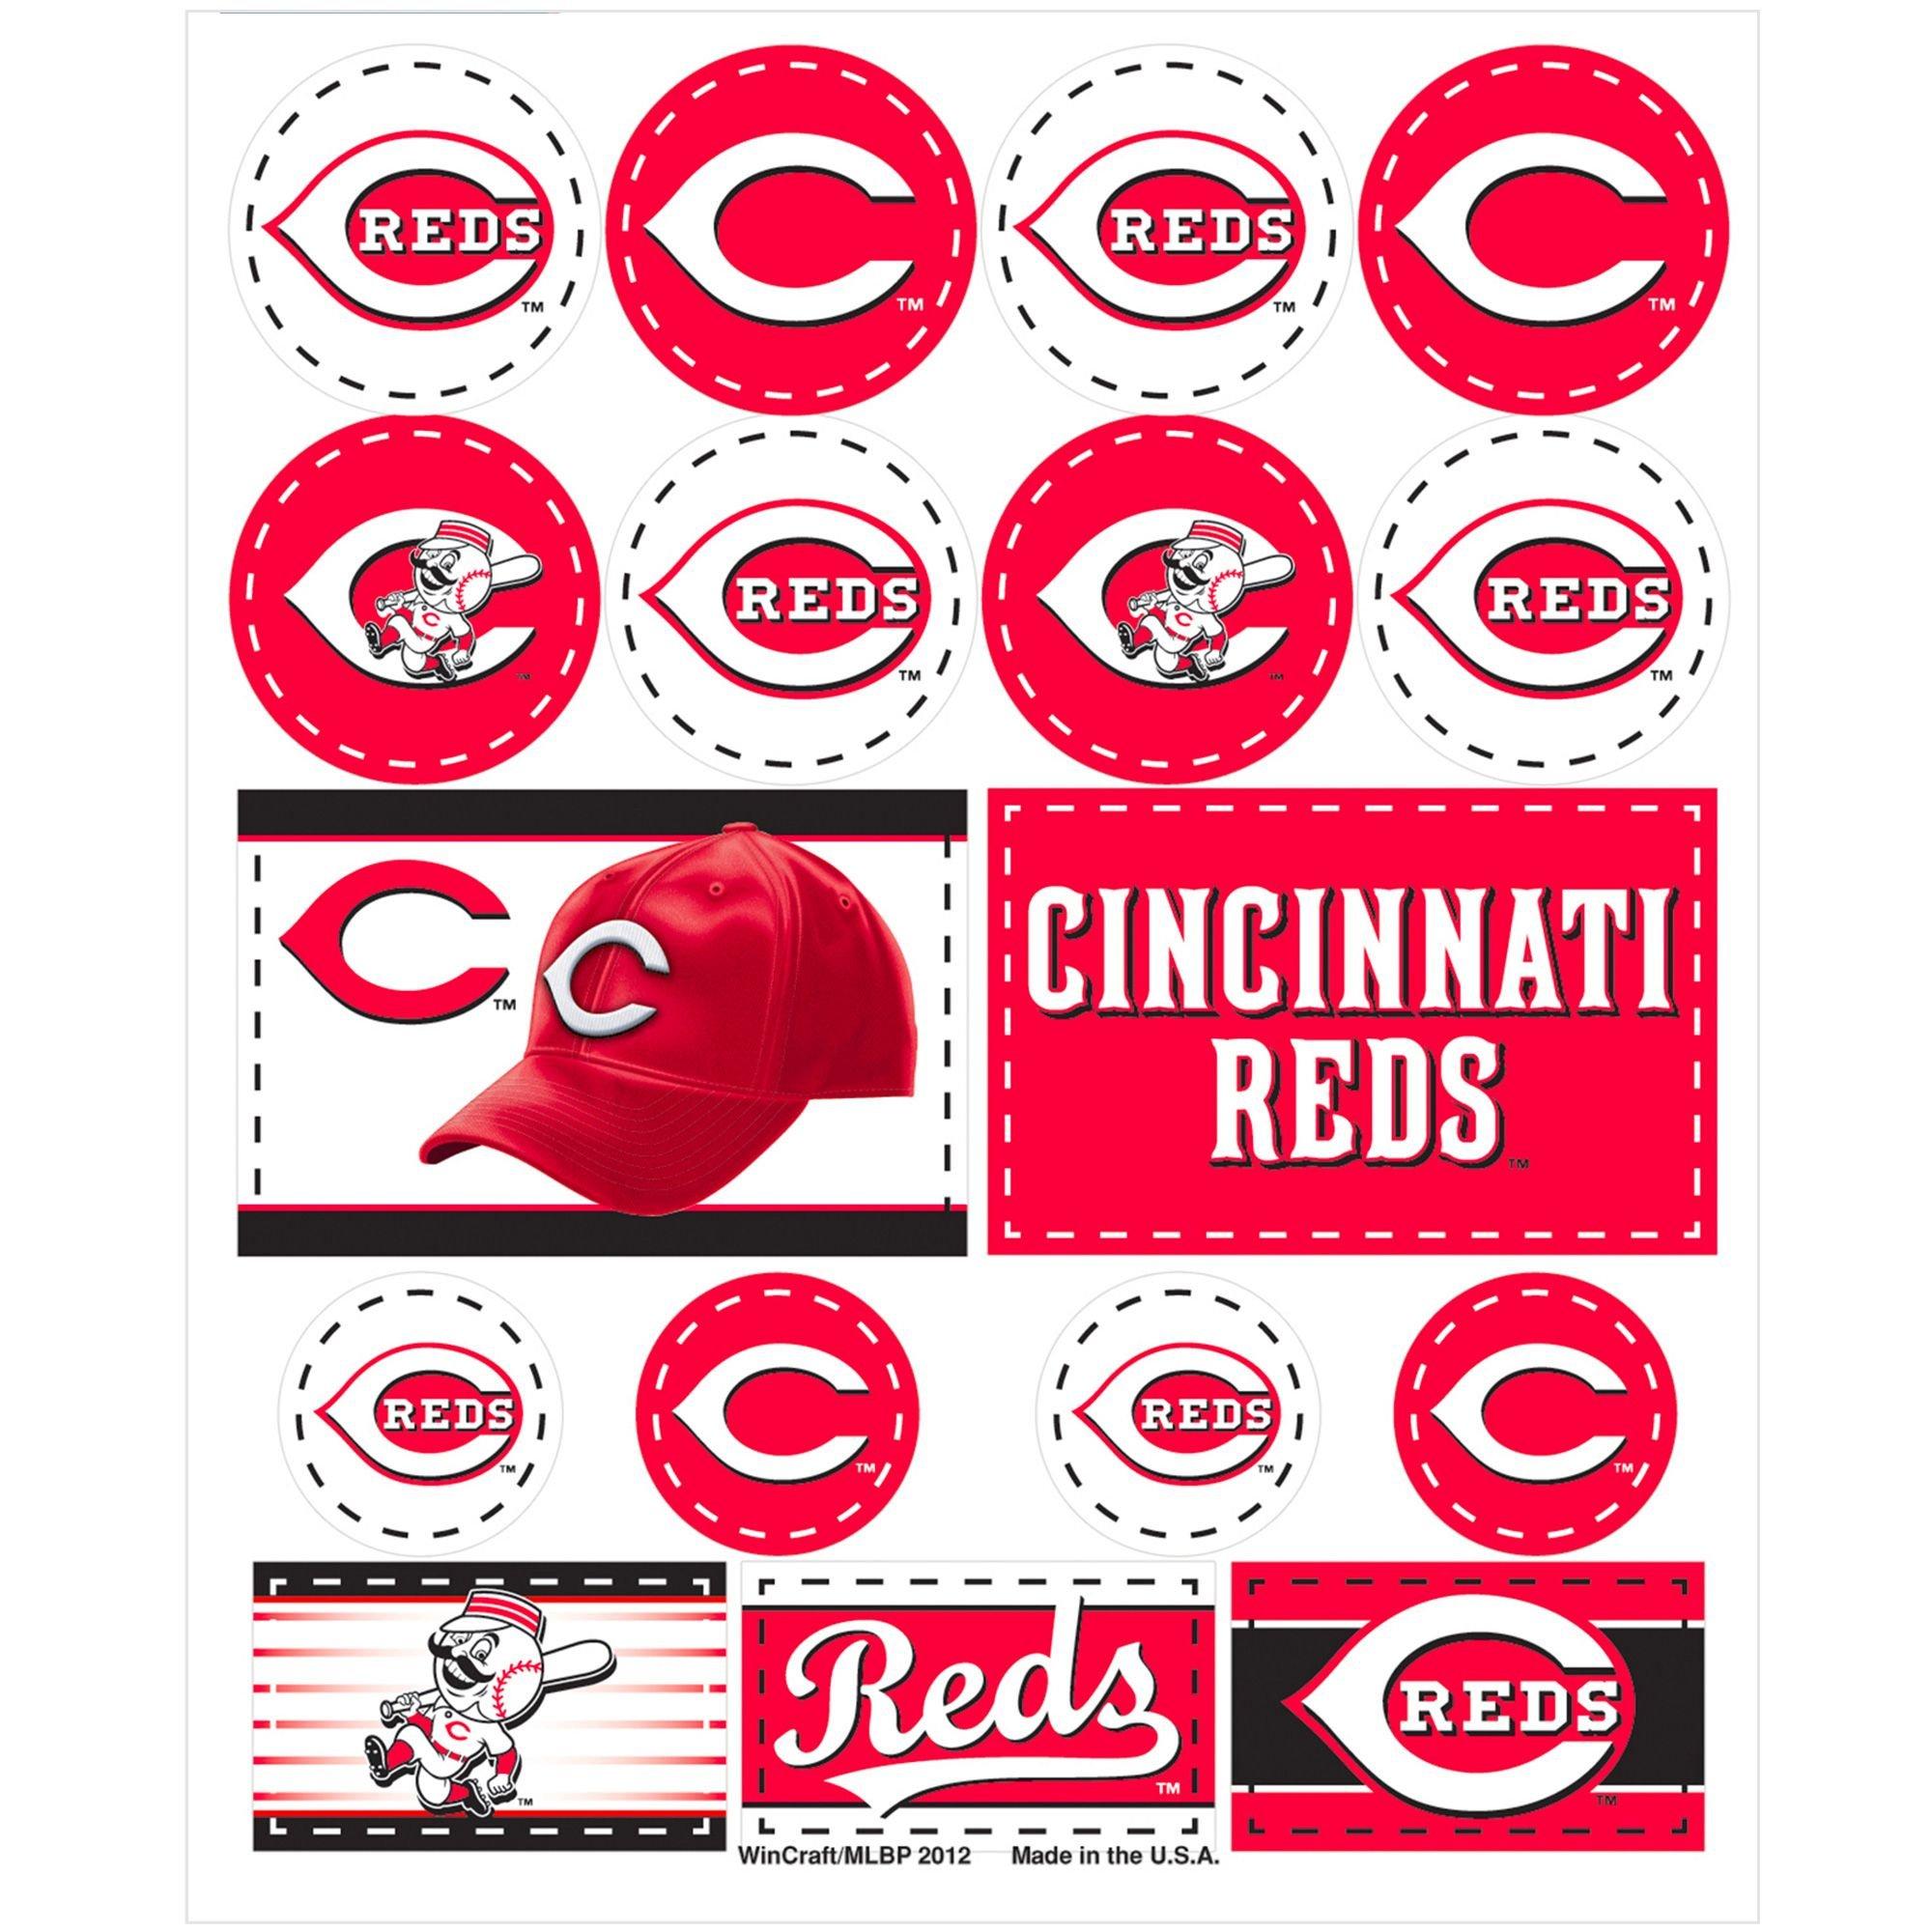 Lot of 3 Vintage Cincinnati Reds Stickers Free Shipping 